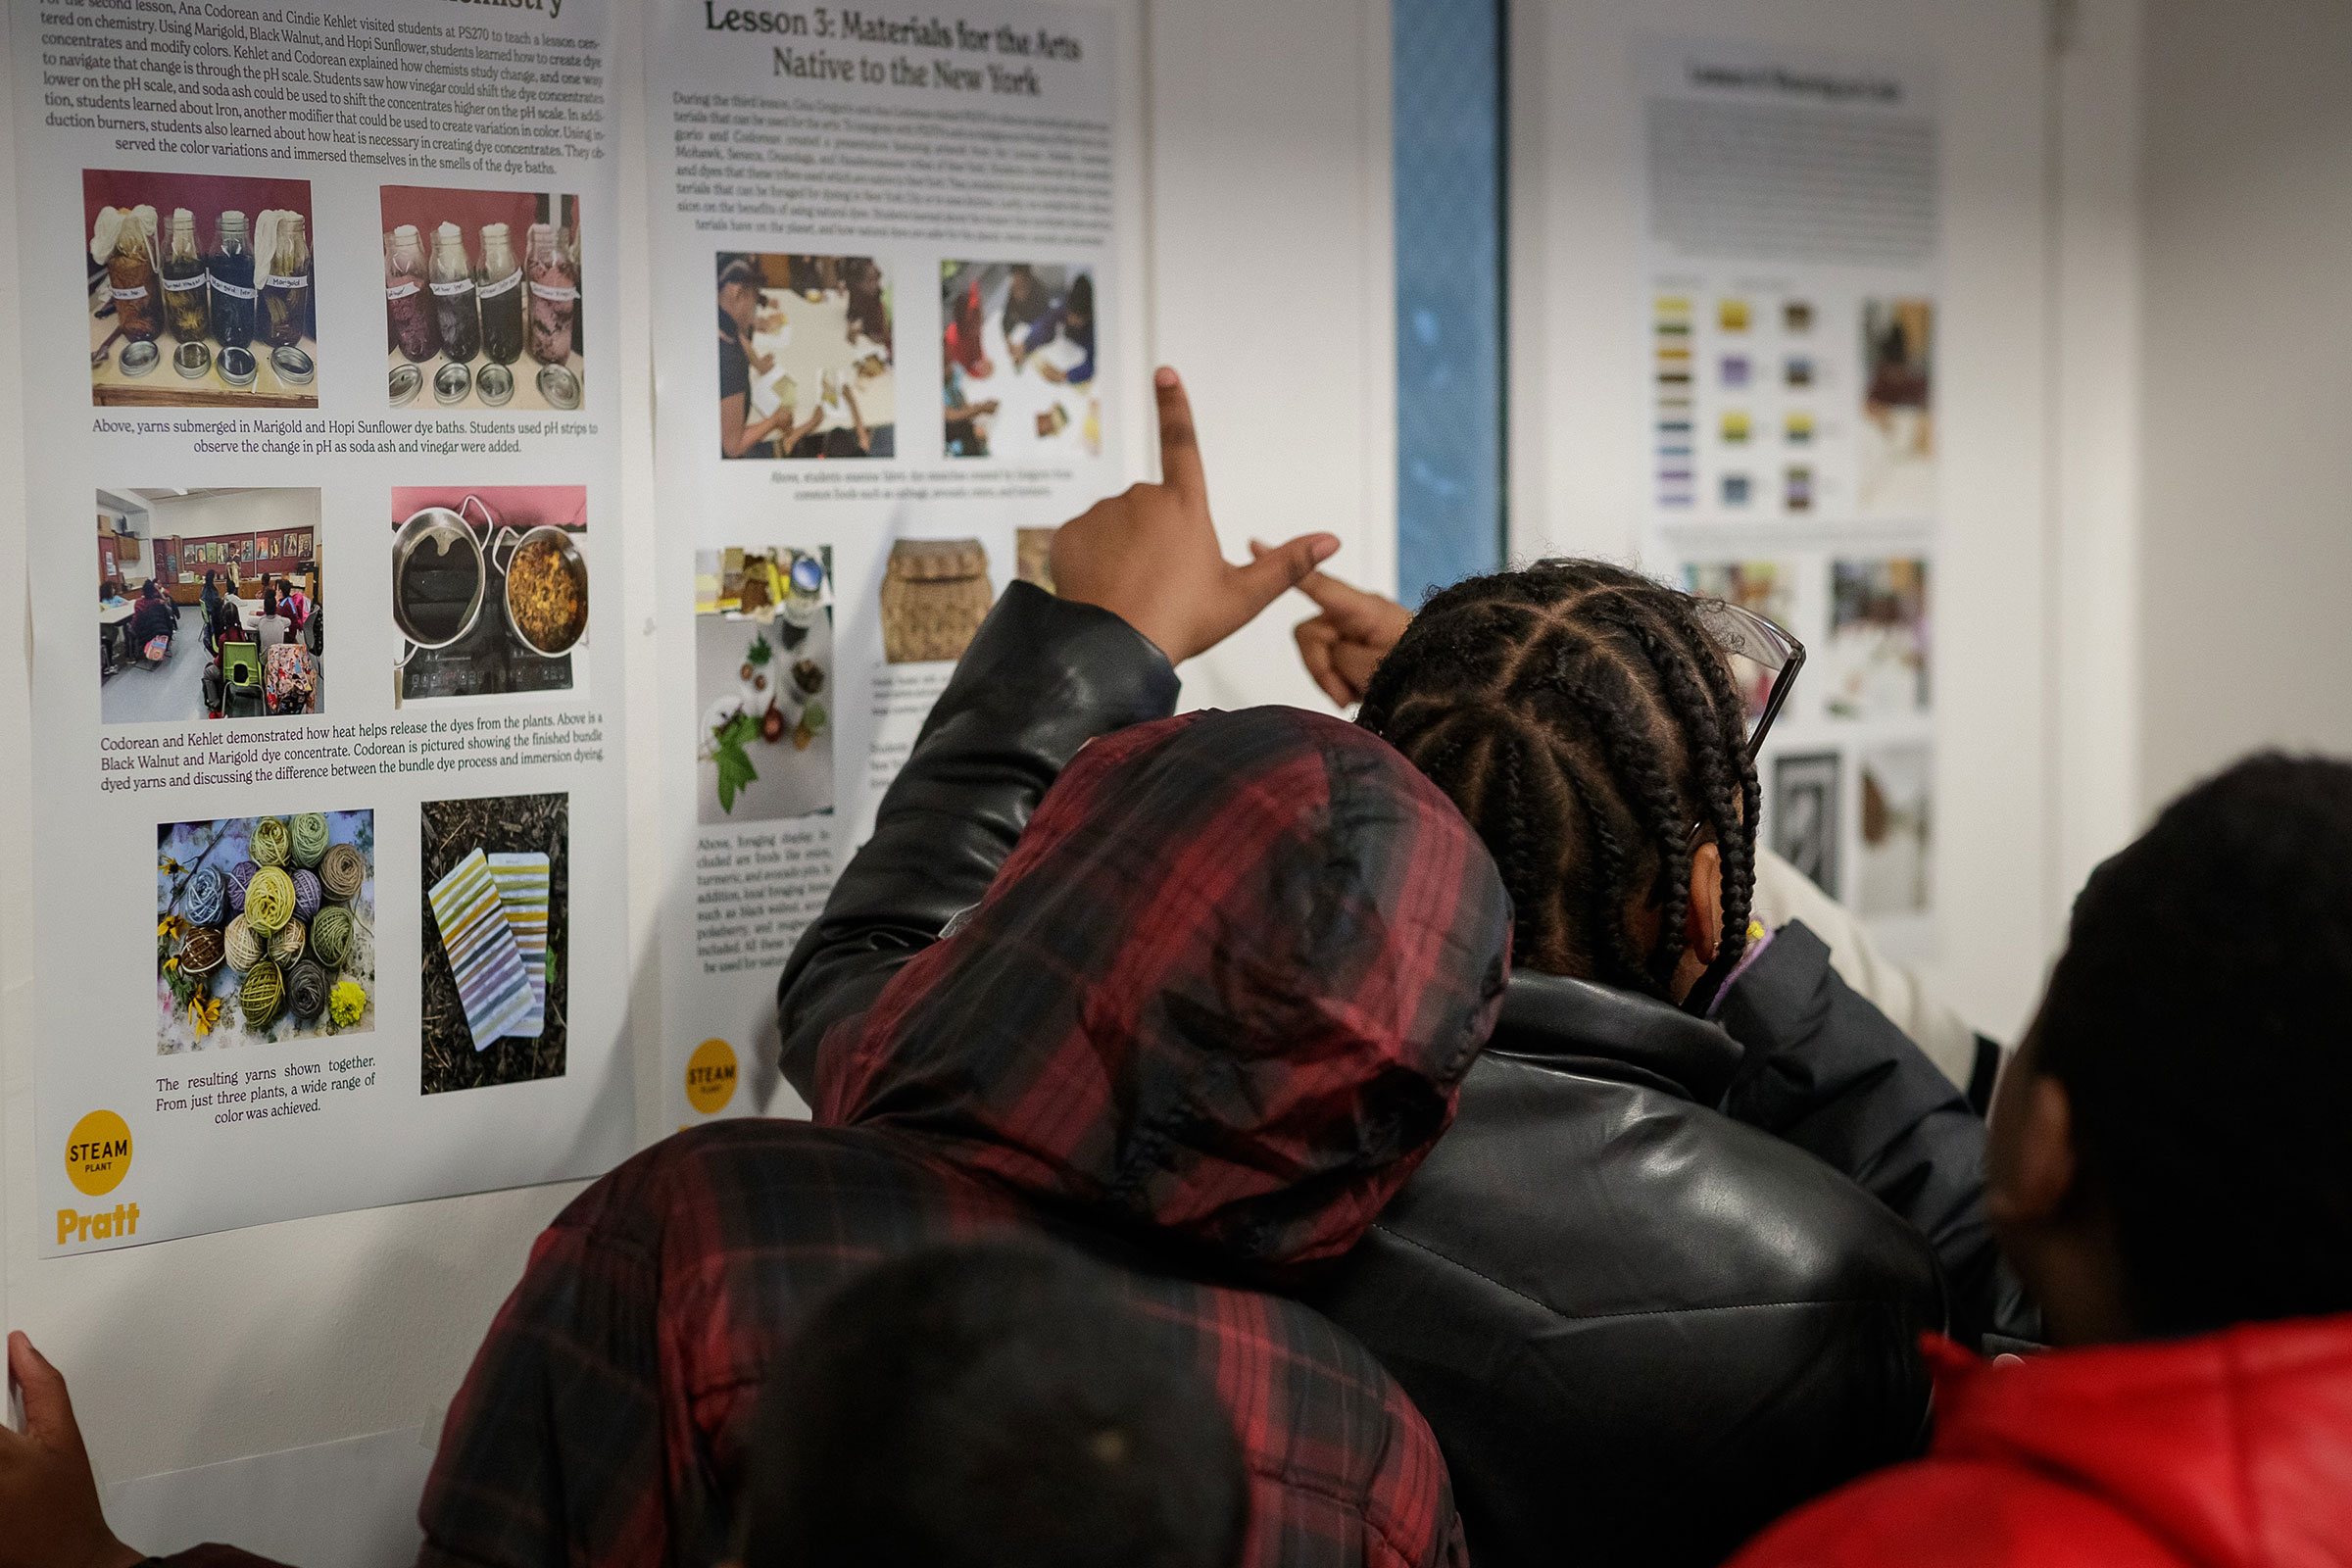 PS270 students viewing their work at Pratt (photo by Ron Hester Photography)